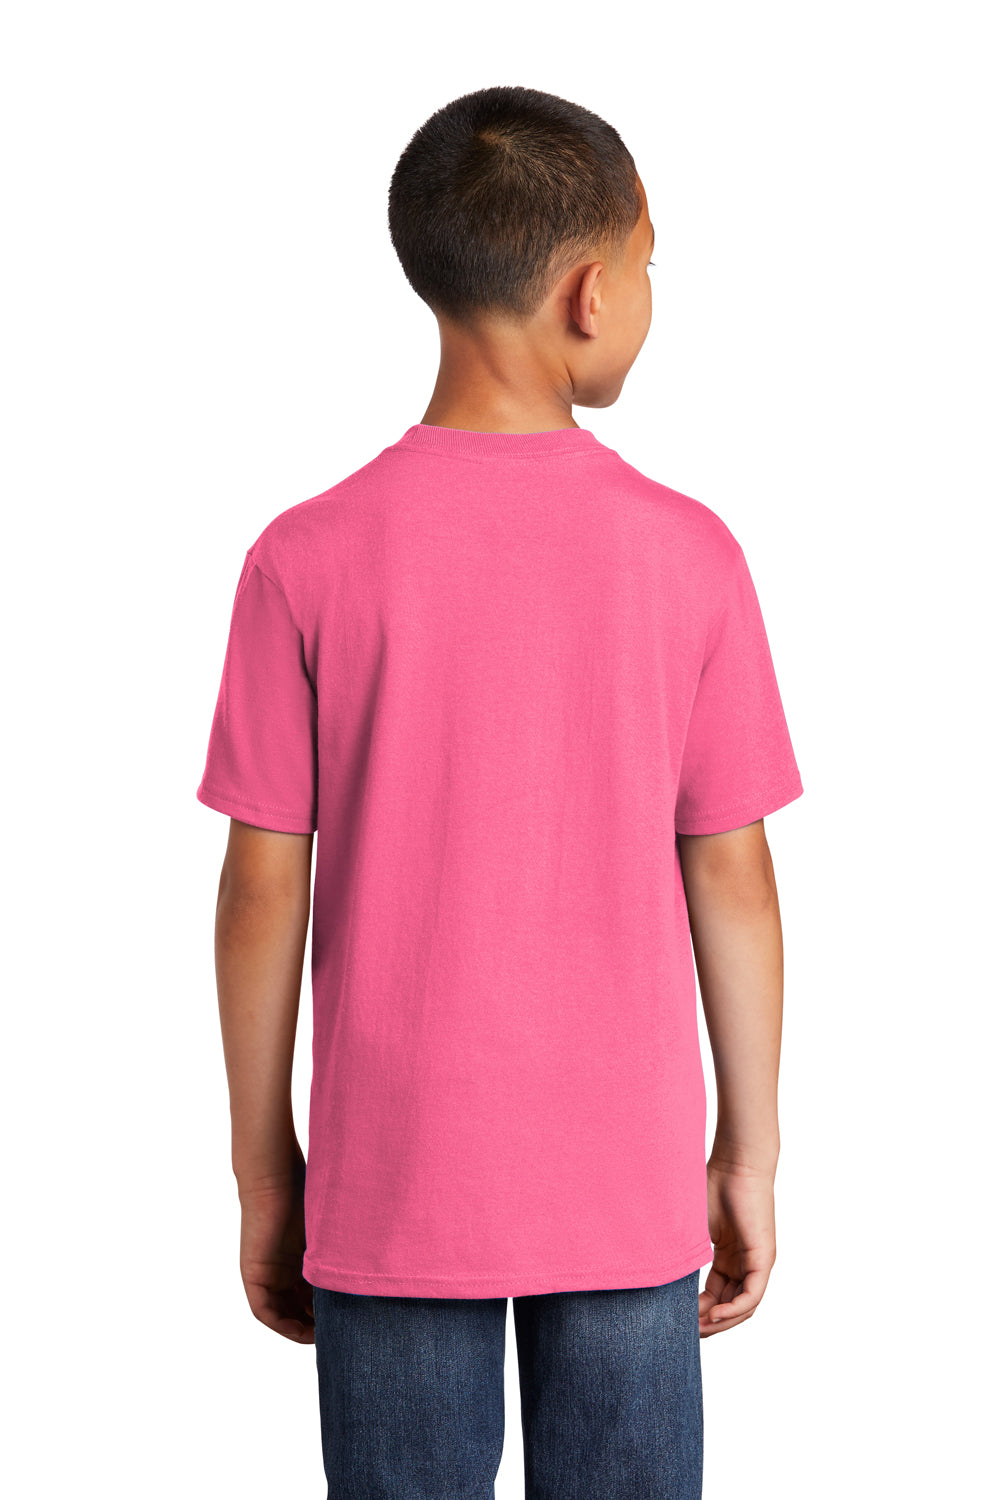 Port & Company PC54Y Youth Core Short Sleeve Crewneck T-Shirt Neon Pink Back